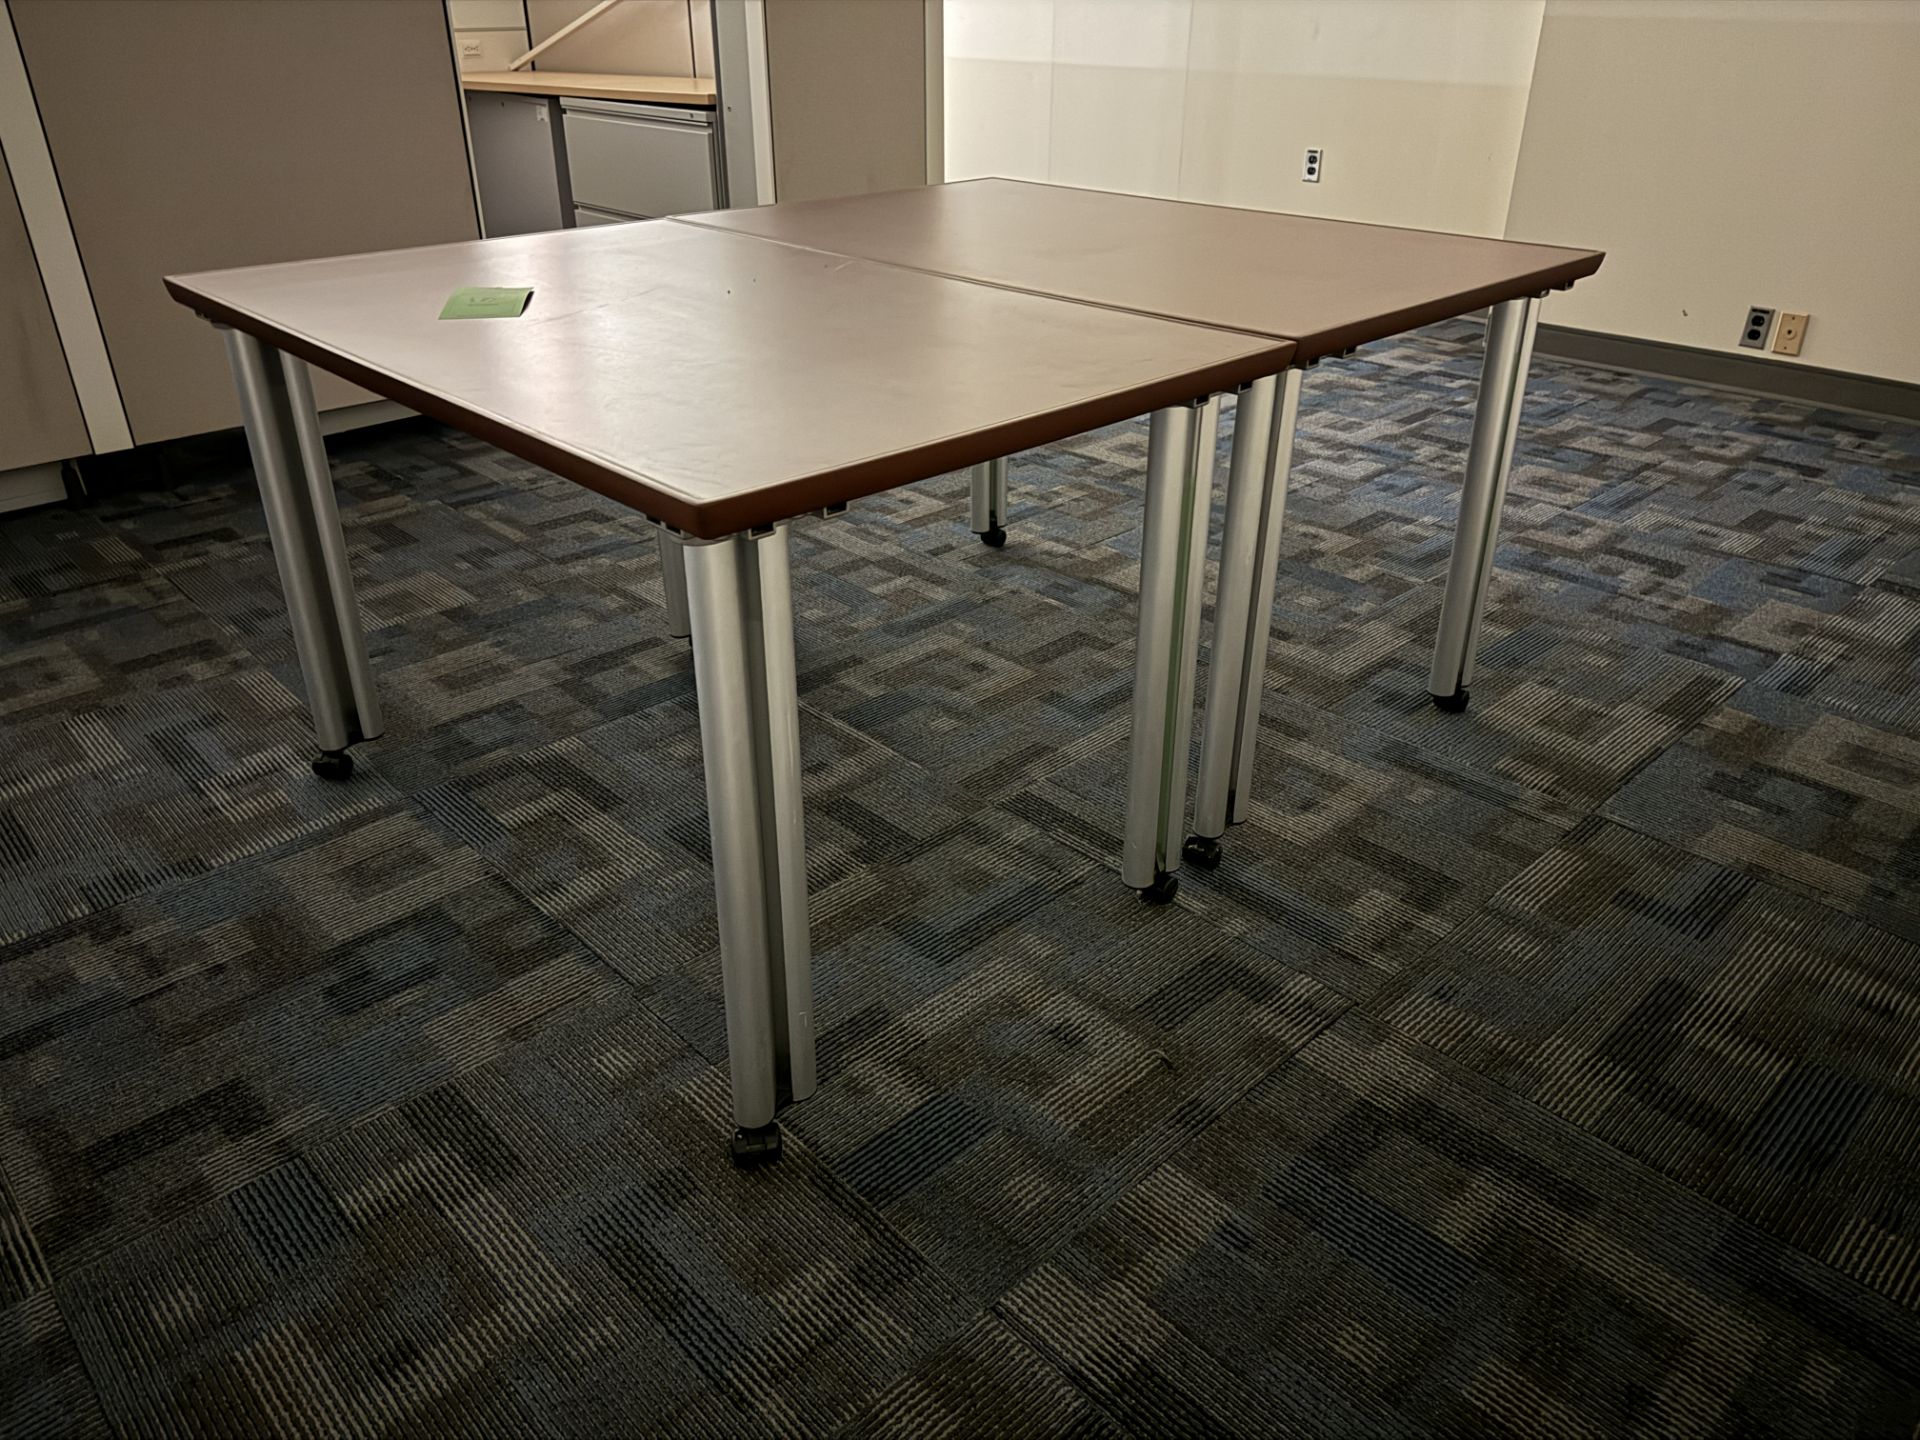 (2) OFFICE TABLES (ZONE 2)